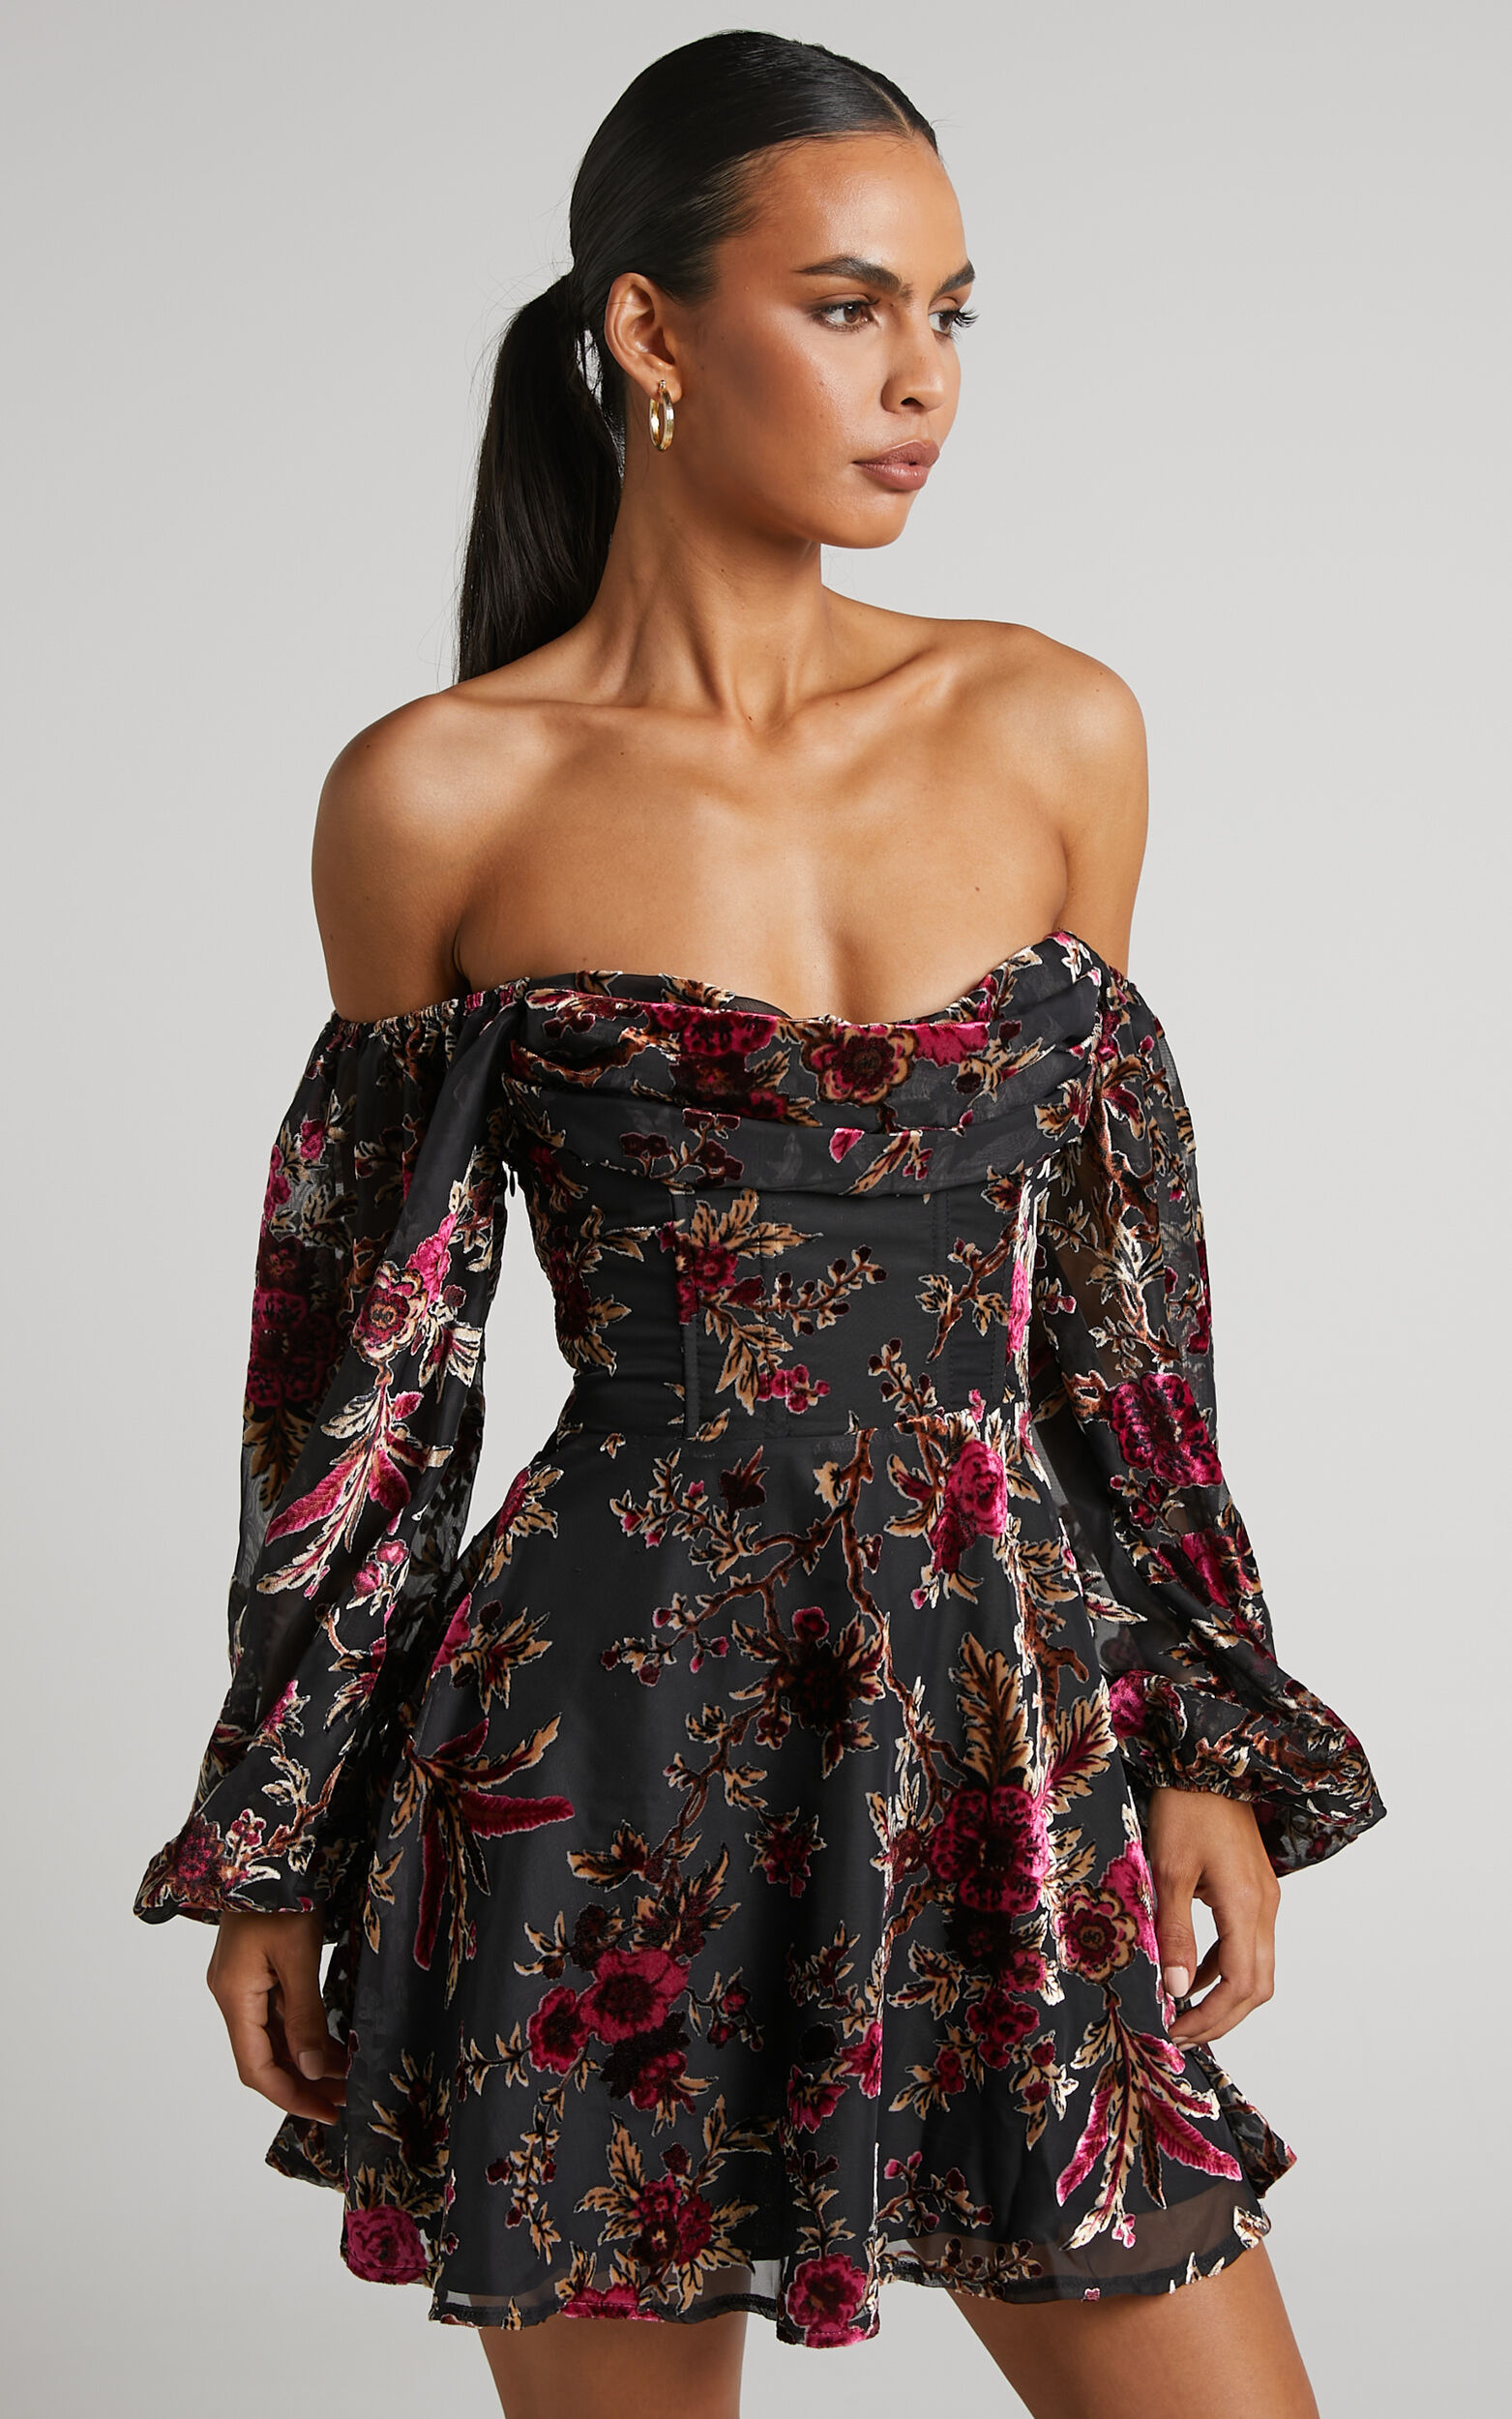  OTHER STORIES Ruffled Tulle Corset Top in Black